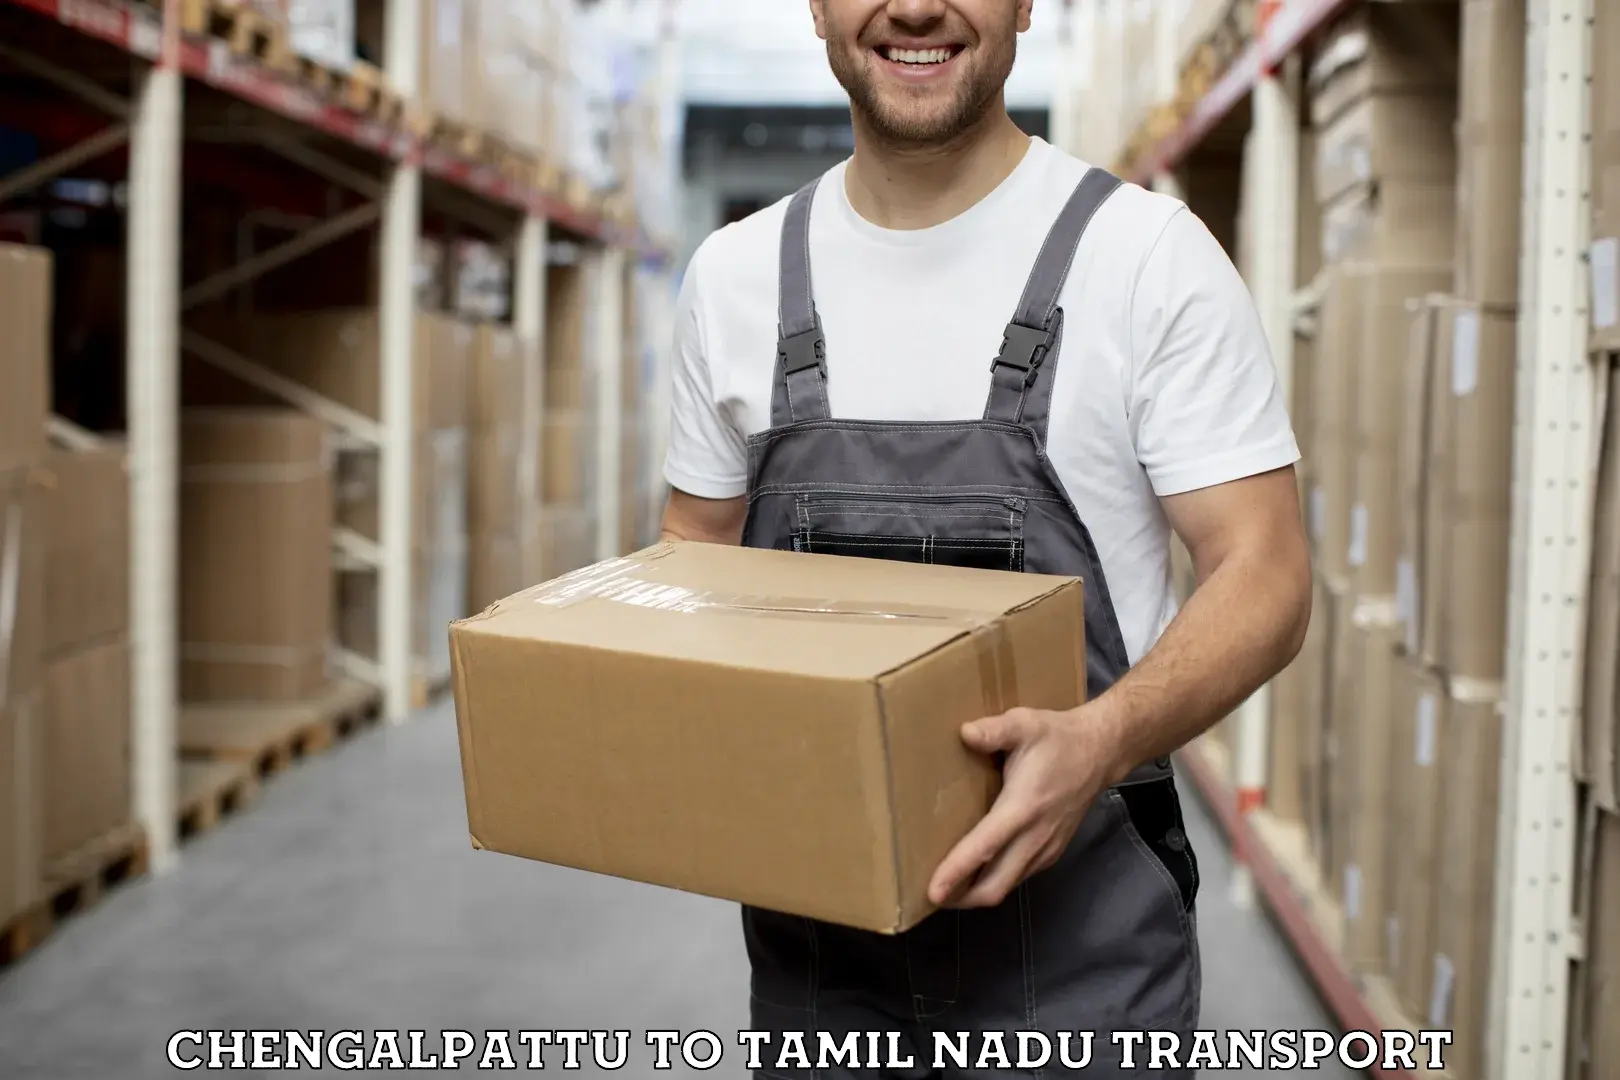 Package delivery services Chengalpattu to Vellore Institute of Technology